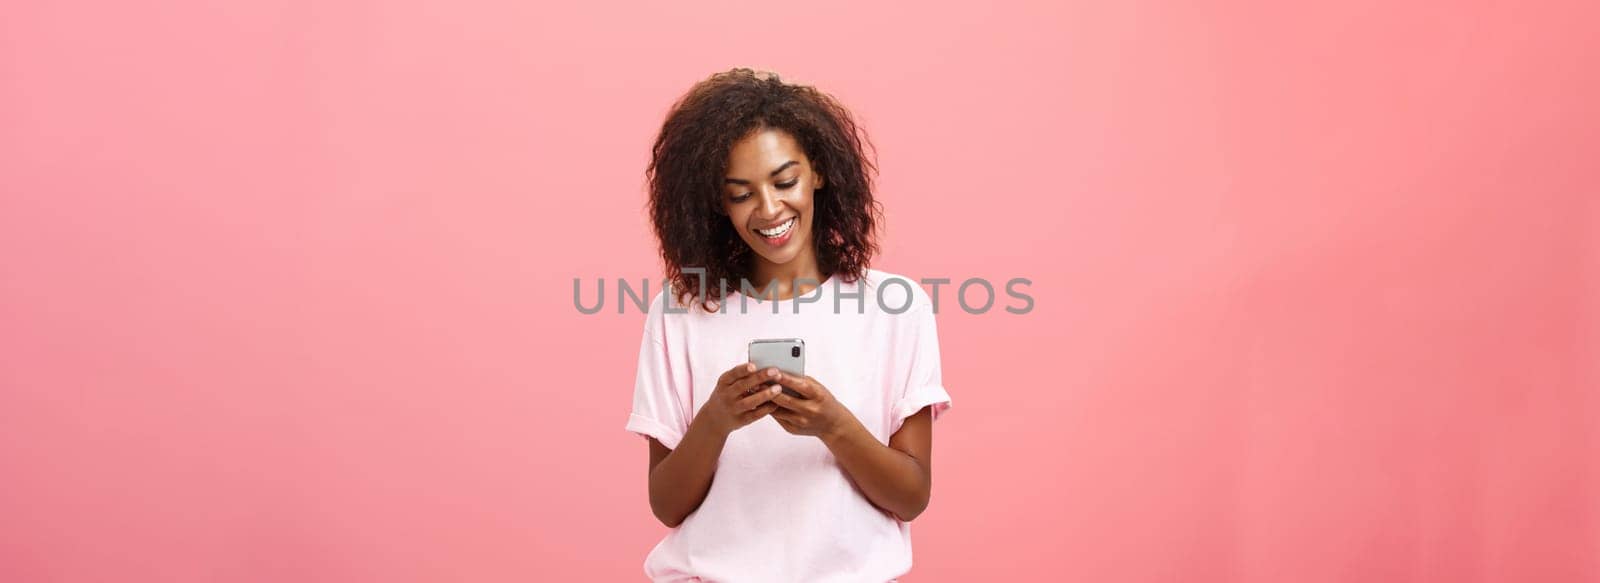 Girl writing text message to friend. Portrait of charming amused and happy young dark-skinned woman with curly hair looking at smartphone screen typing smiling enjoying cool features of cellphone.